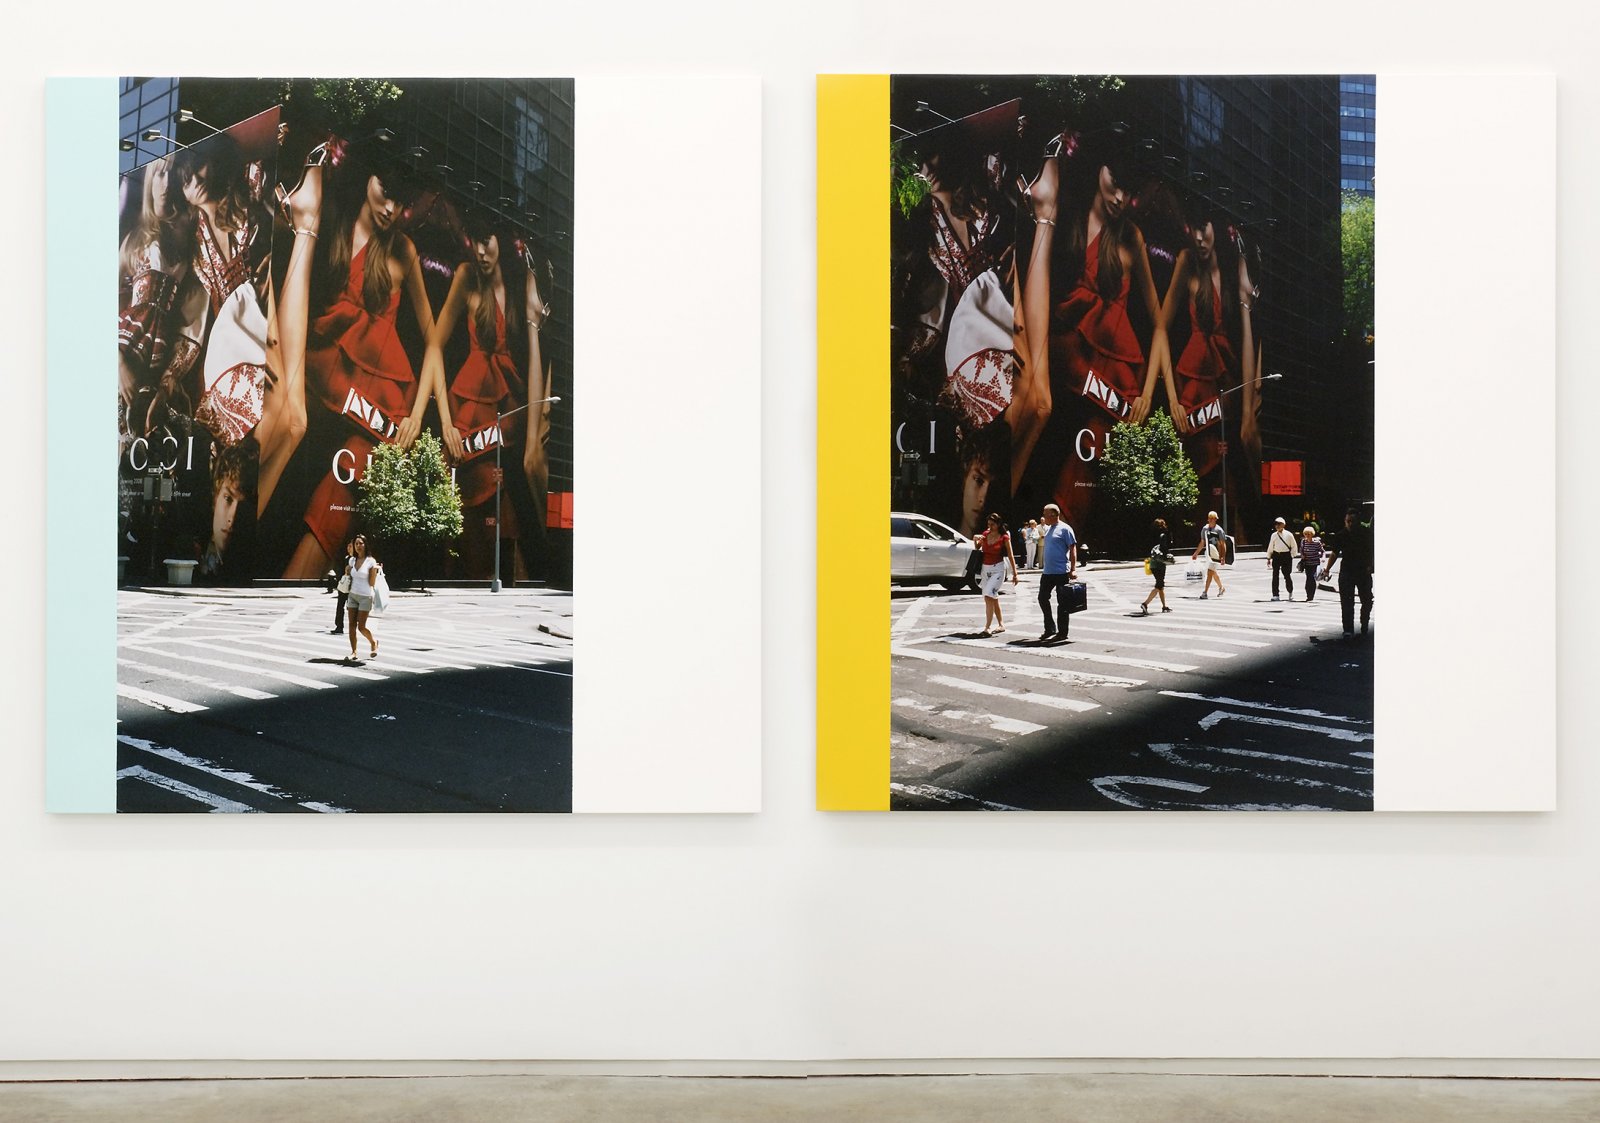 Ian Wallace, 5th Avenue Crosswalk NYC (June 15, 2007) I and II, 2008, 2 photolaminate with acrylic on canvas, each 60 x 60 in. (152 x 152 cm)